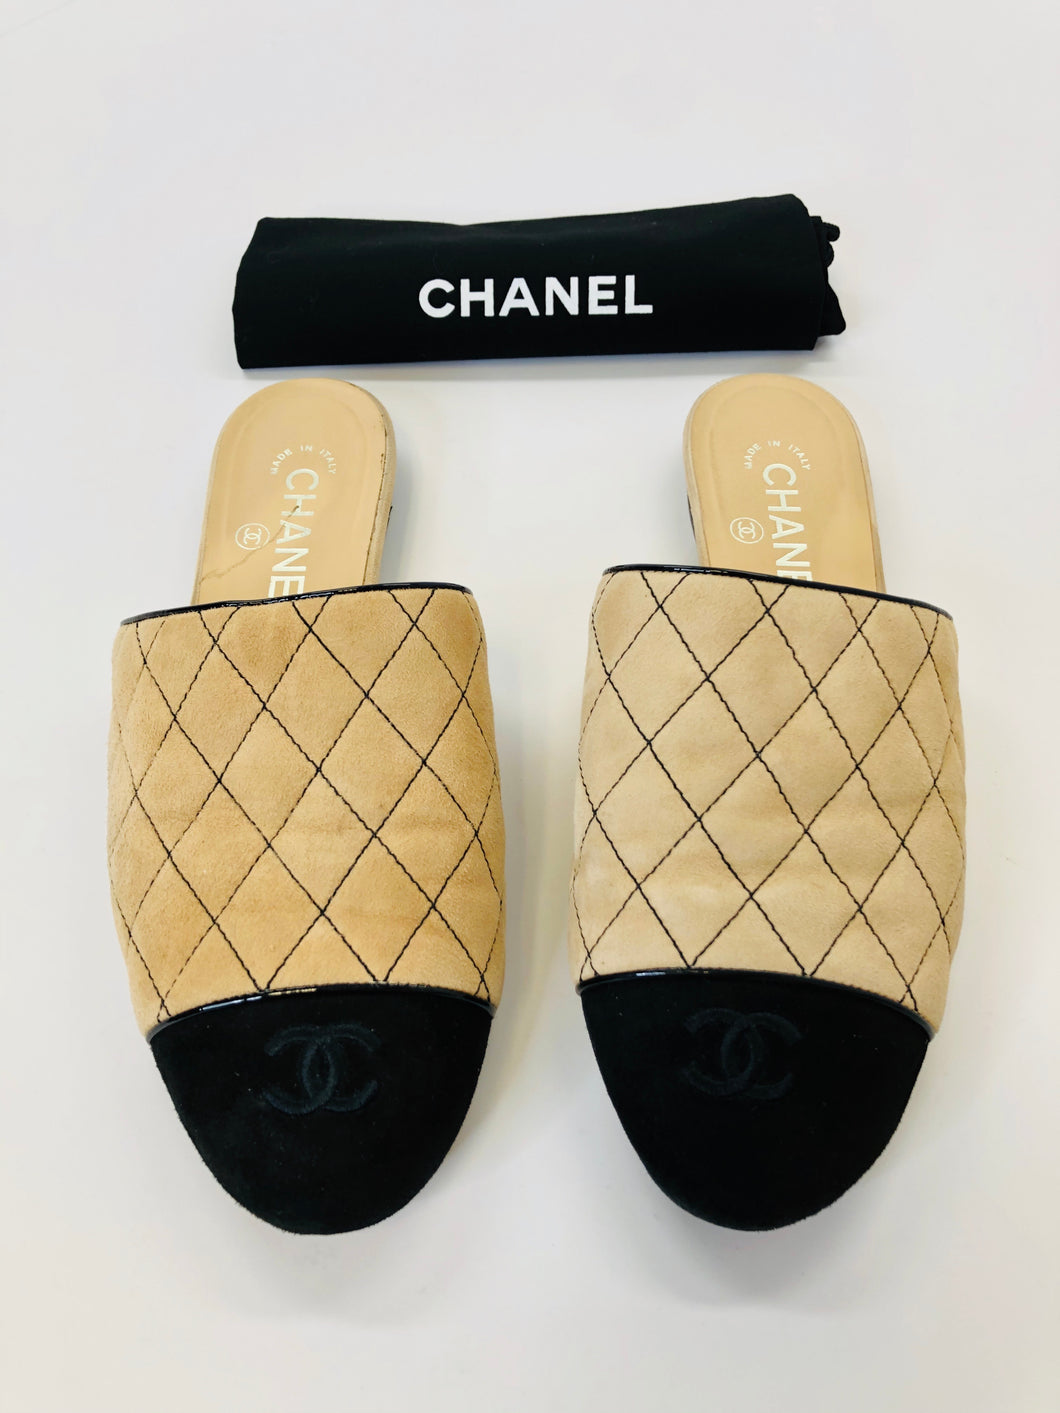 CHANEL Beige and Black Mules Size 37 1/2